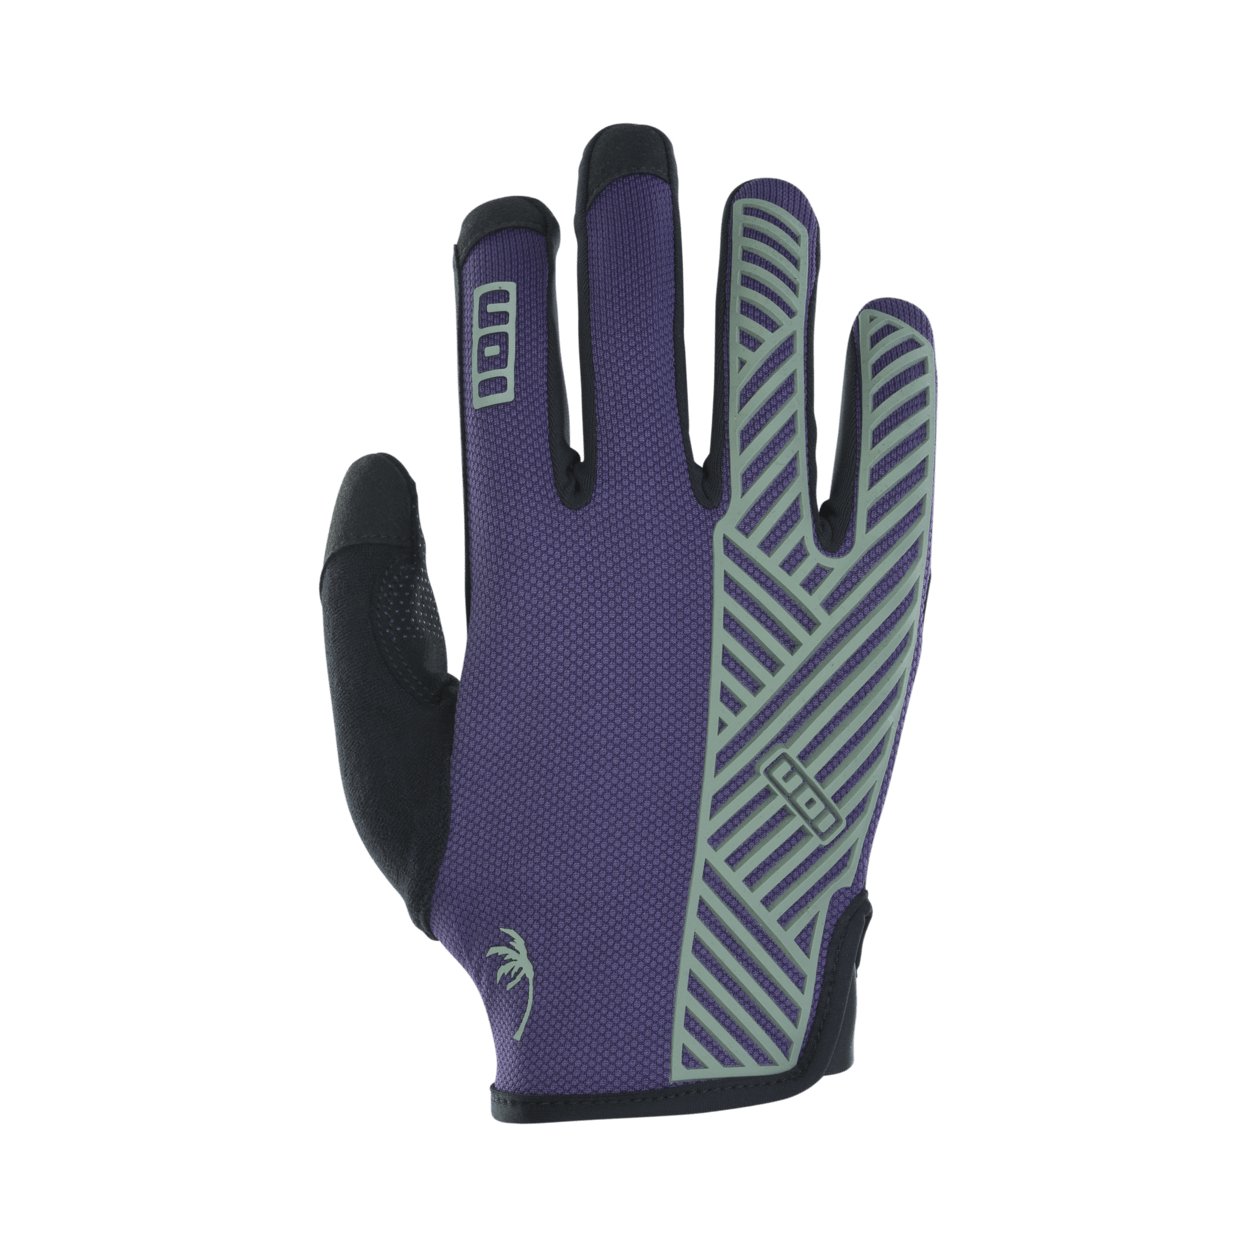 ION MTB Gloves Scrub Select 2024 - Worthing Watersports - 9010583100777 - Gloves - ION Bike